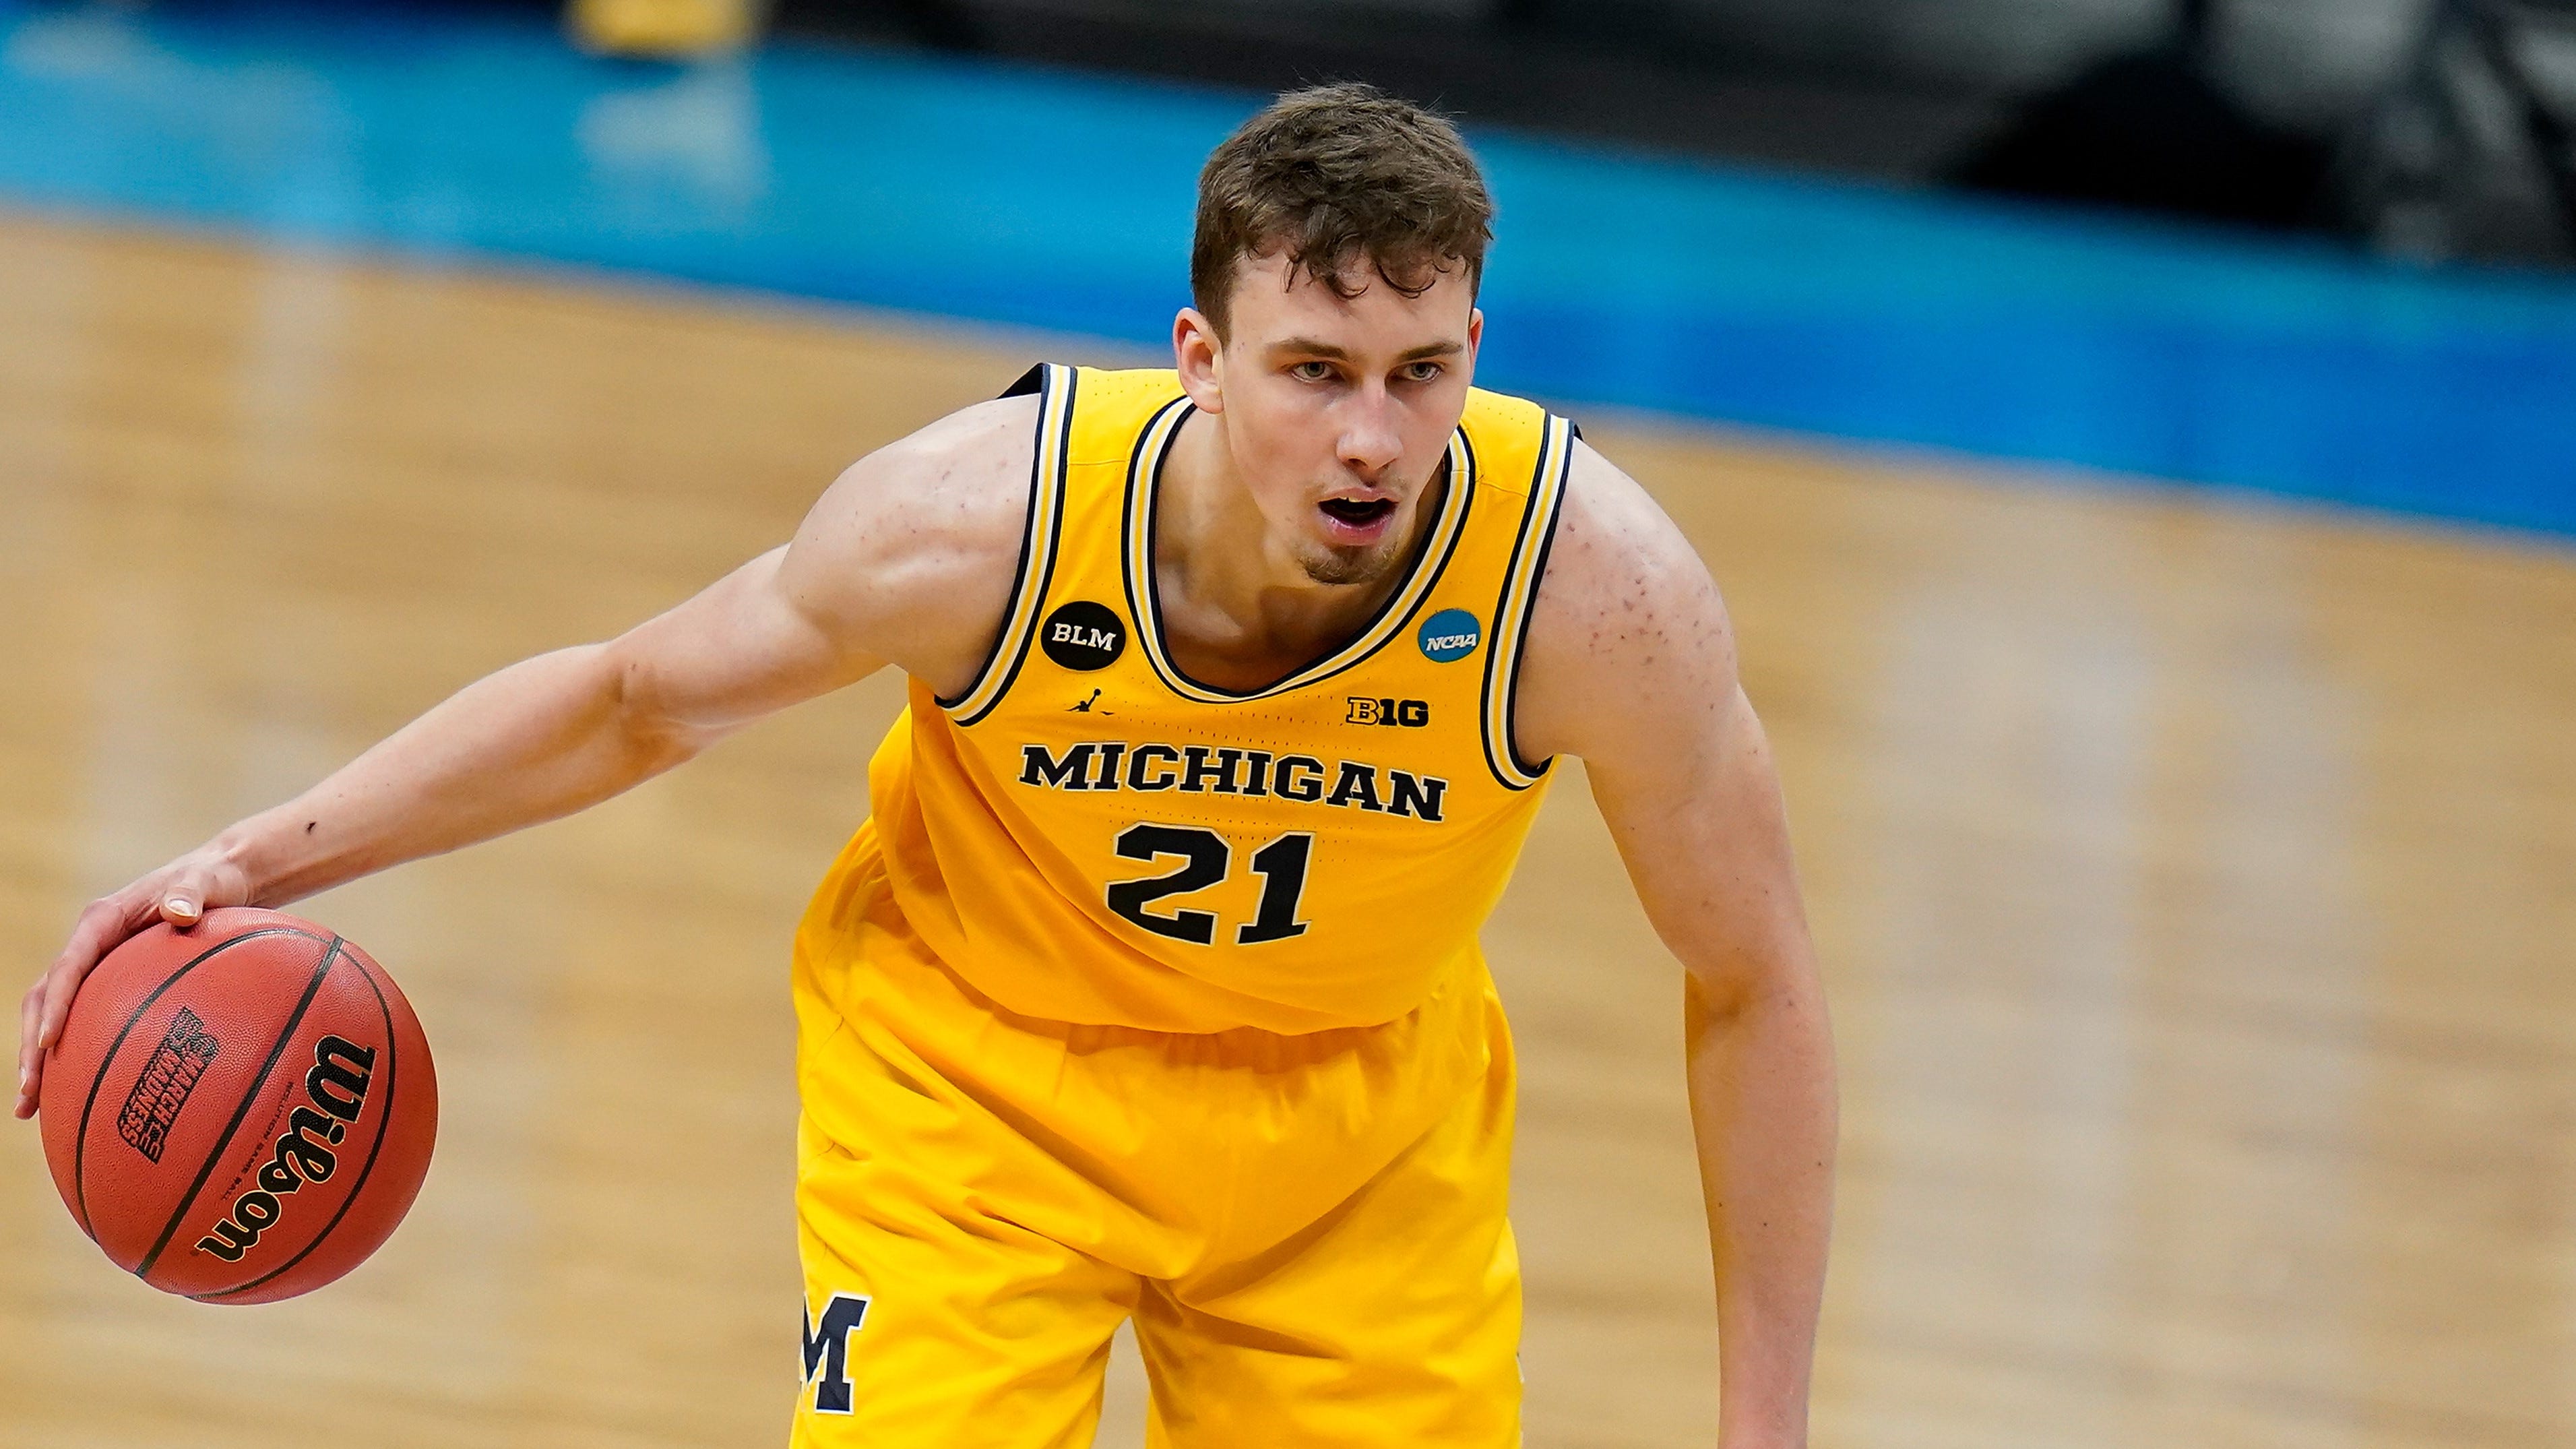 Michigan guard Franz Wagner dribbles up court during a Sweet 16 game against Florida State in the NCAA men's college basketball tournament at Bankers Life Fieldhouse, Sunday, March 28, 2021, in Indianapolis. (AP Photo/Jeff Roberson) ORG XMIT: NYOTK